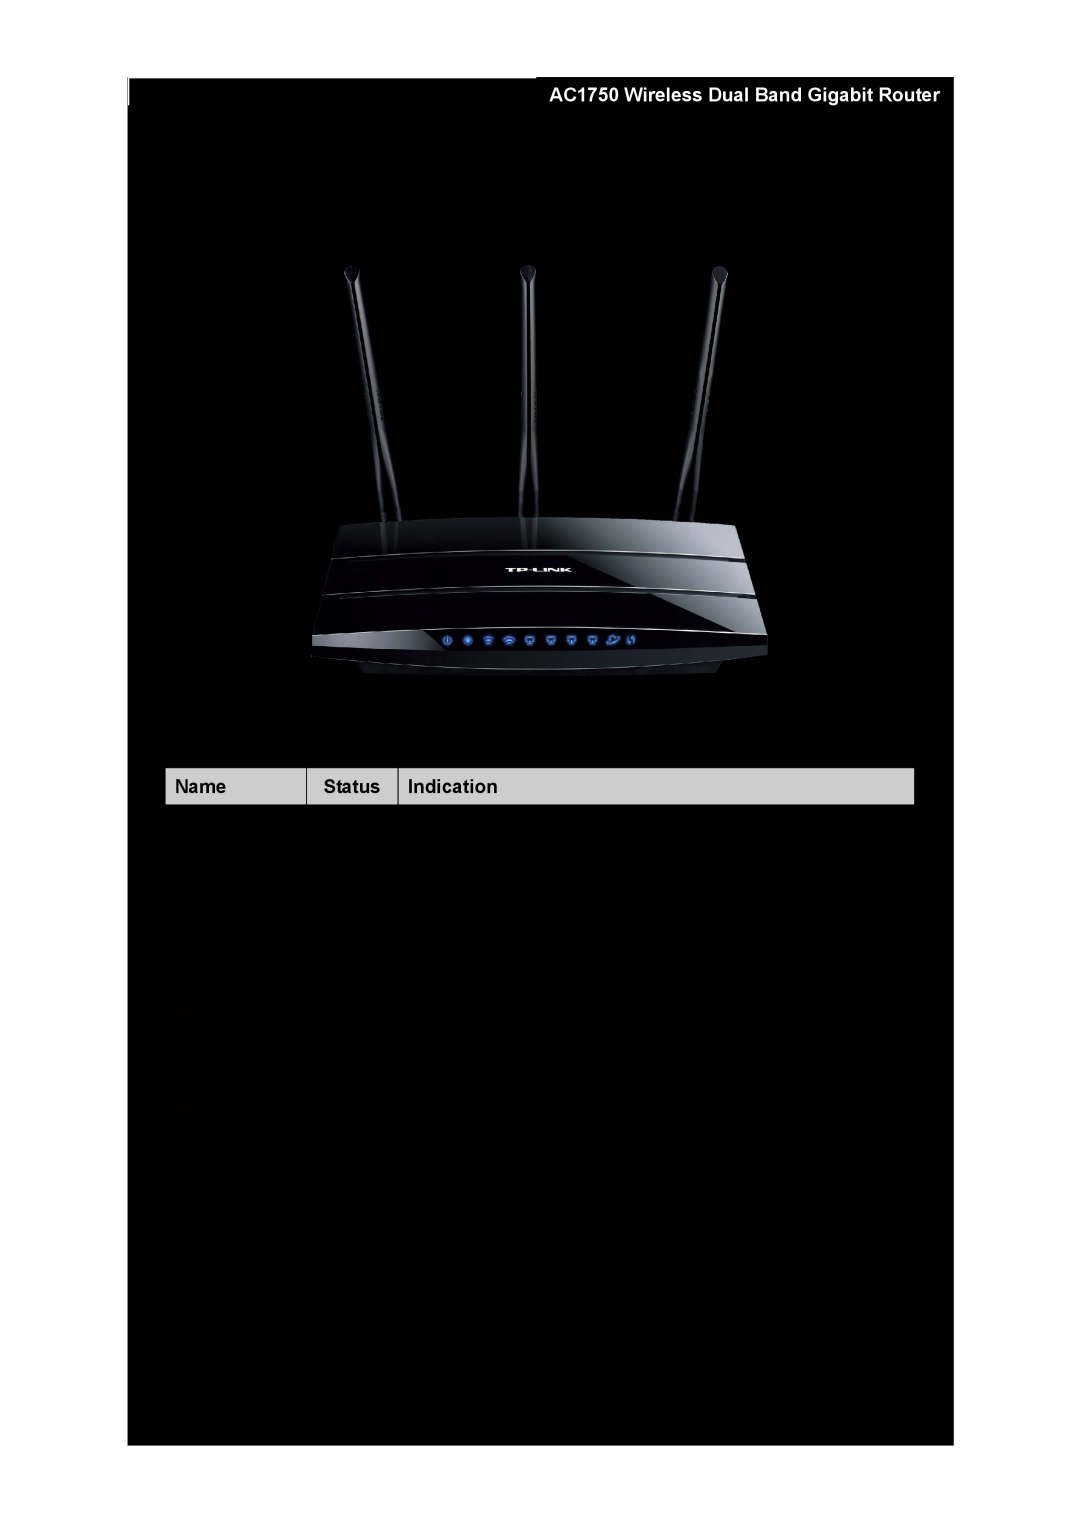 TP-Link manual Panel Layout, The Front Panel, Name, Indication, Archer C7 AC1750 Wireless Dual Band Gigabit Router 